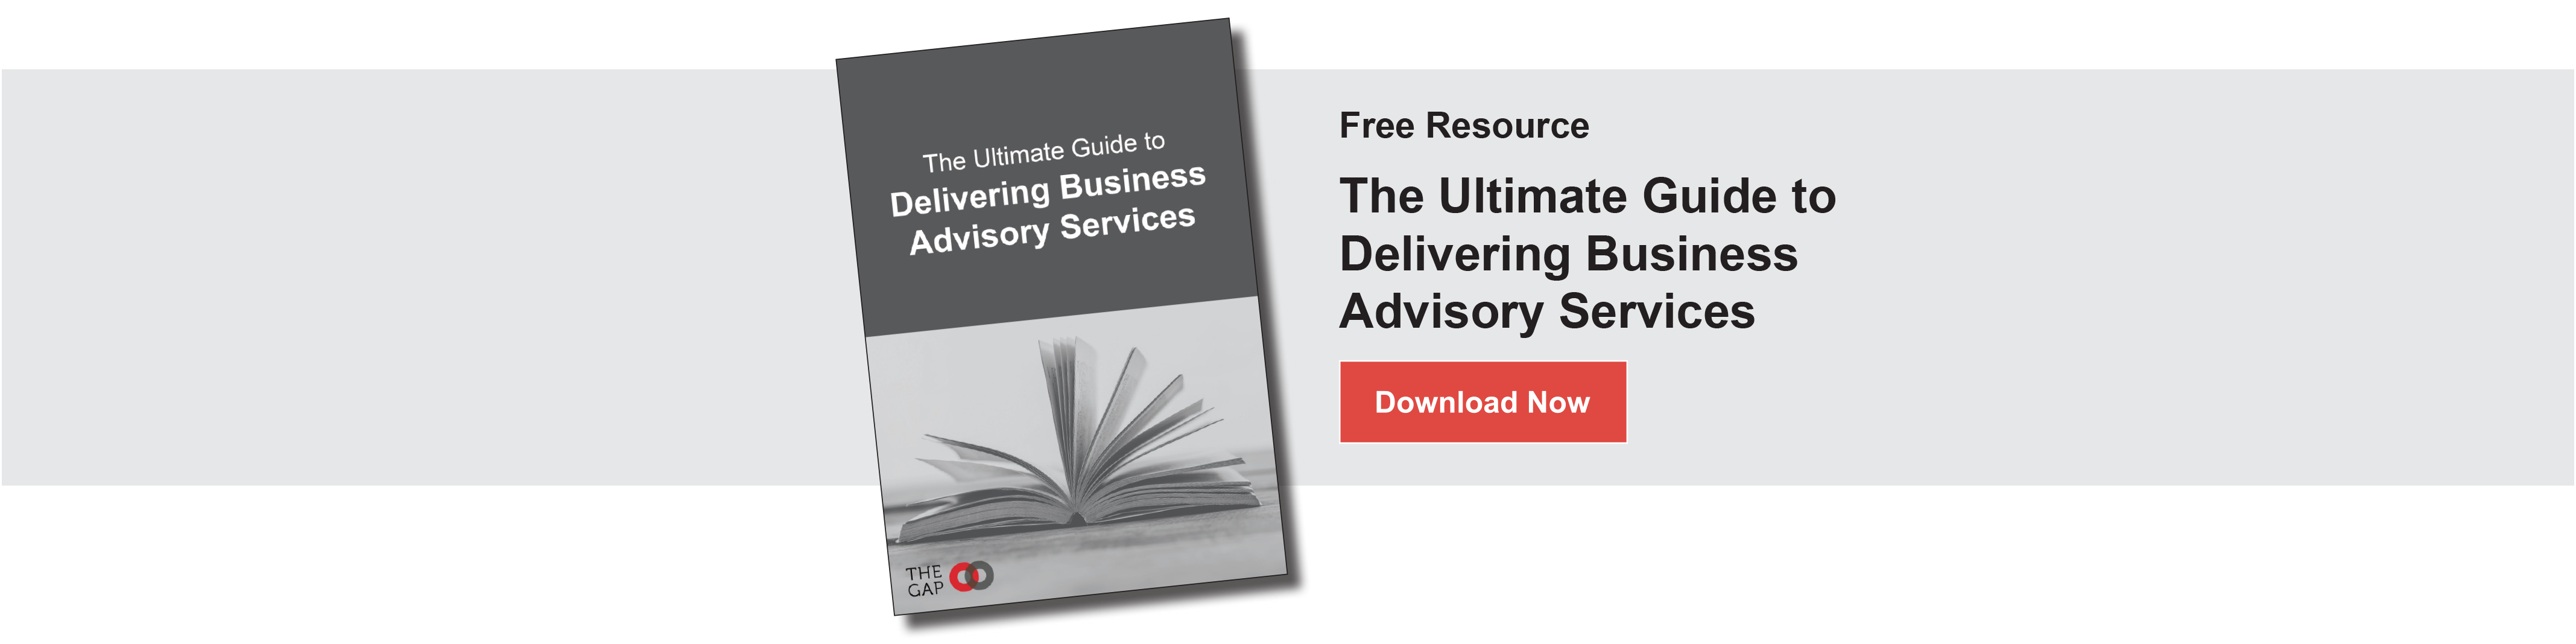 Download our FREE Ultimate Guide to Delivering Business Advisory Services